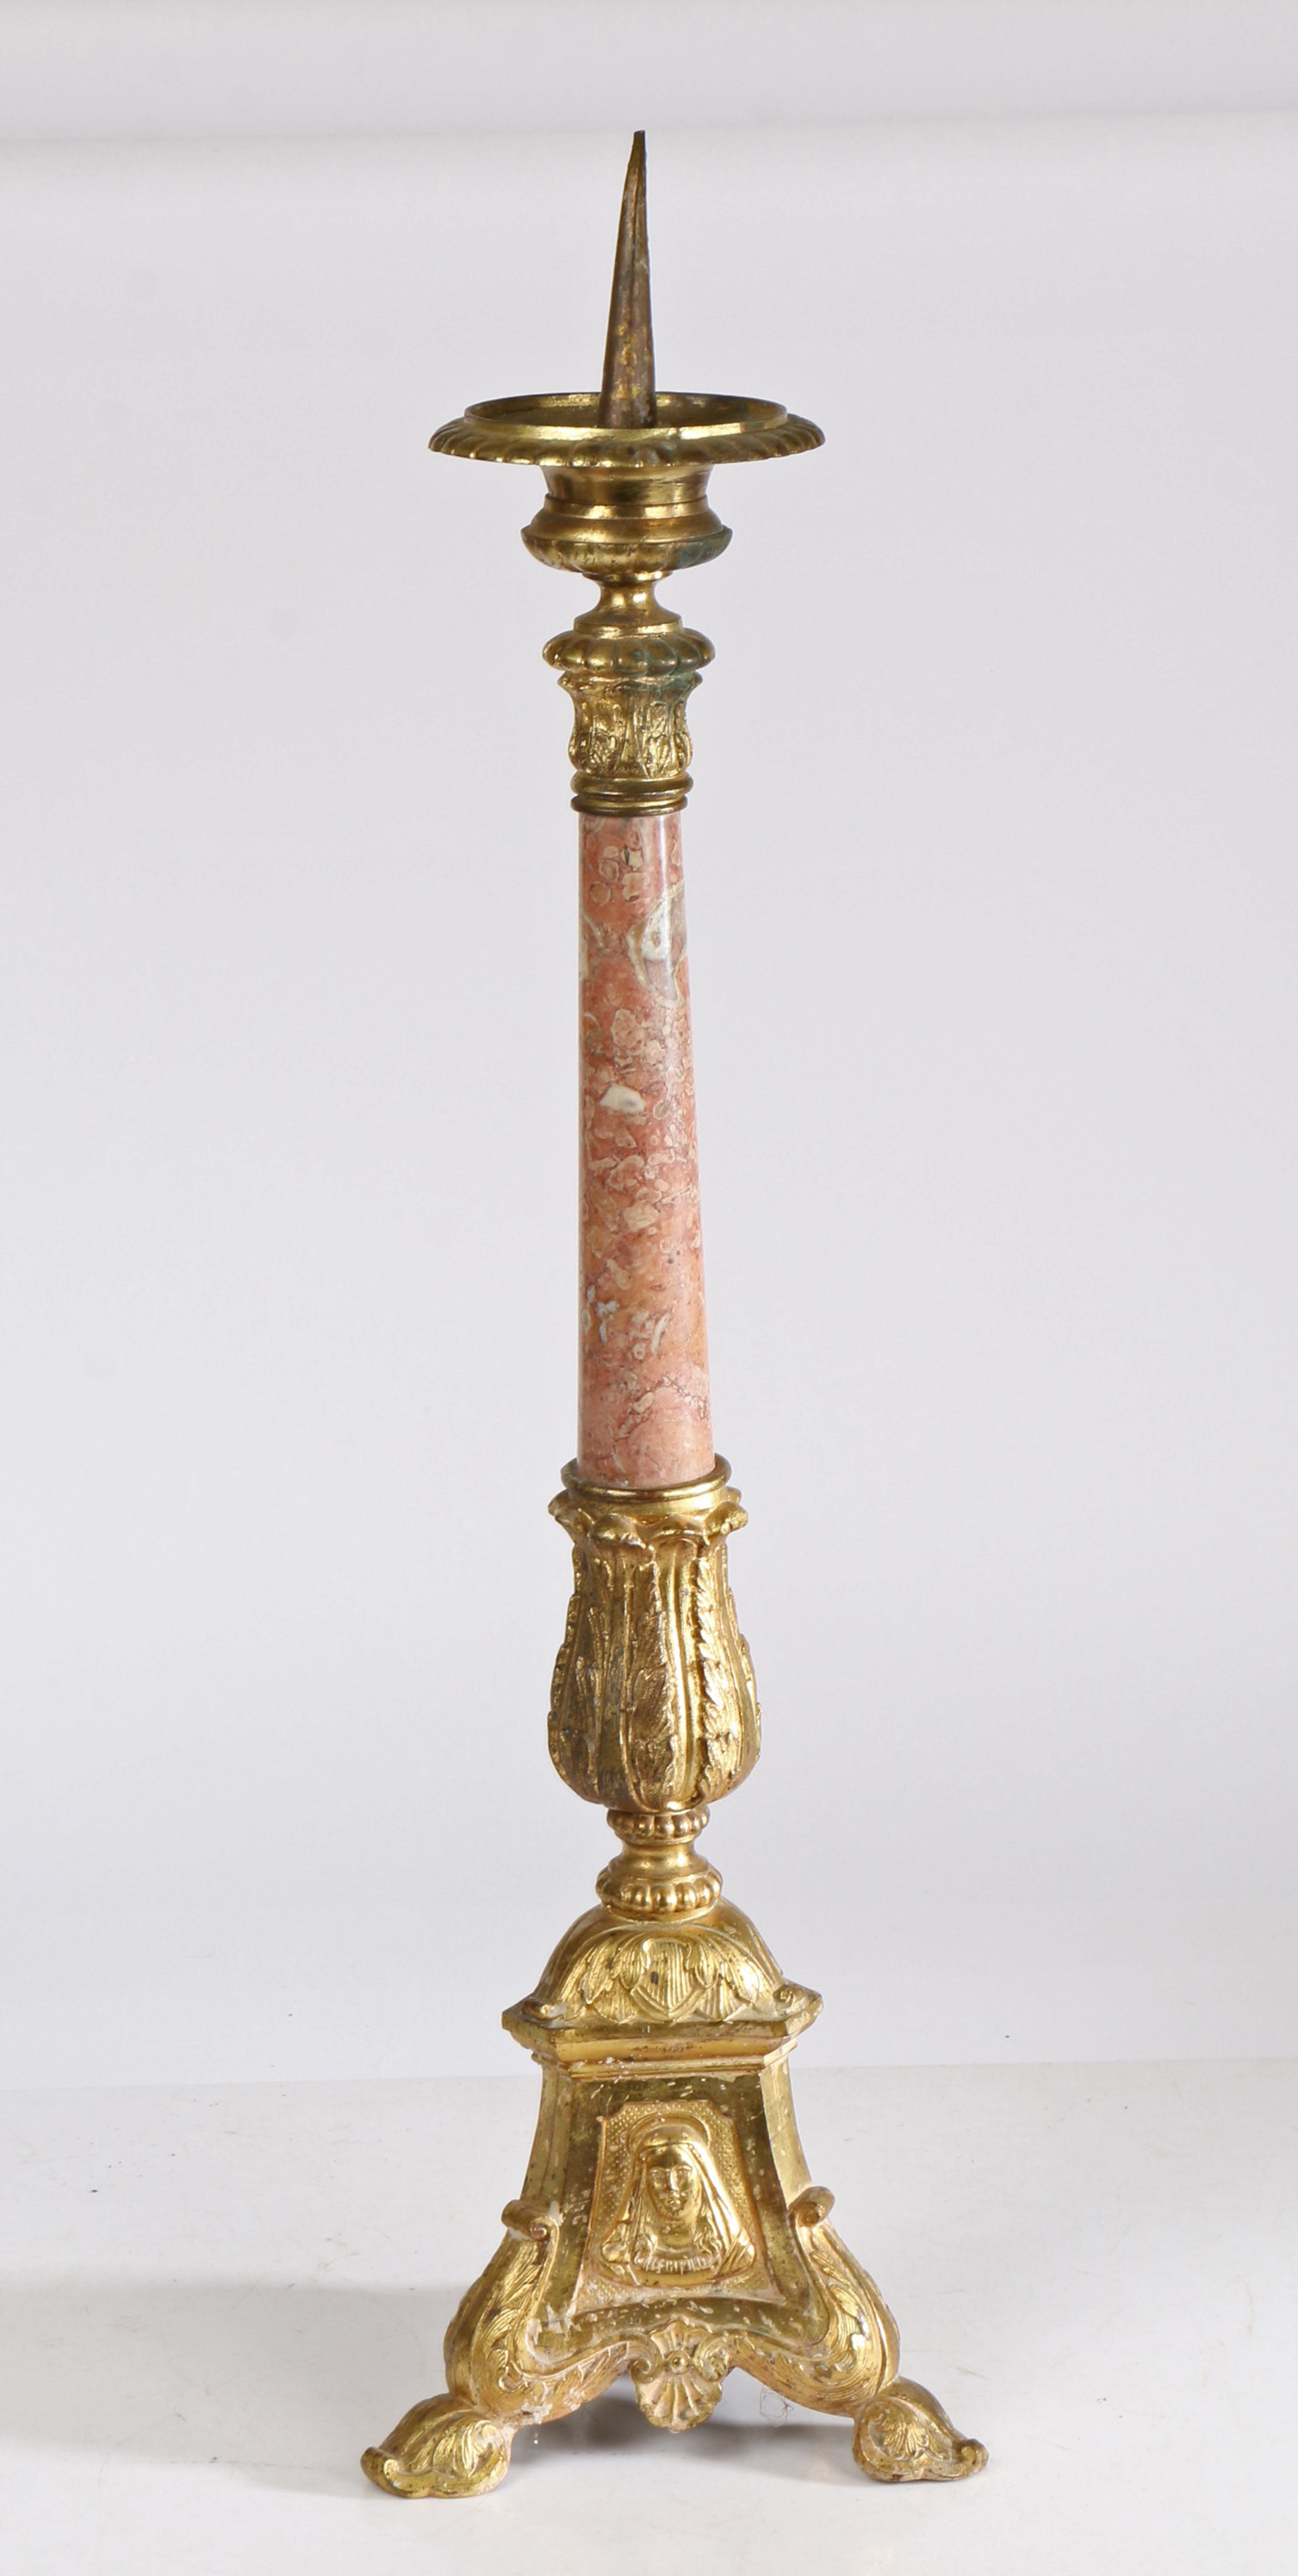 A 18th century style gilt metal pricket candlestick, having a gadrooned flange above a acanthus leaf